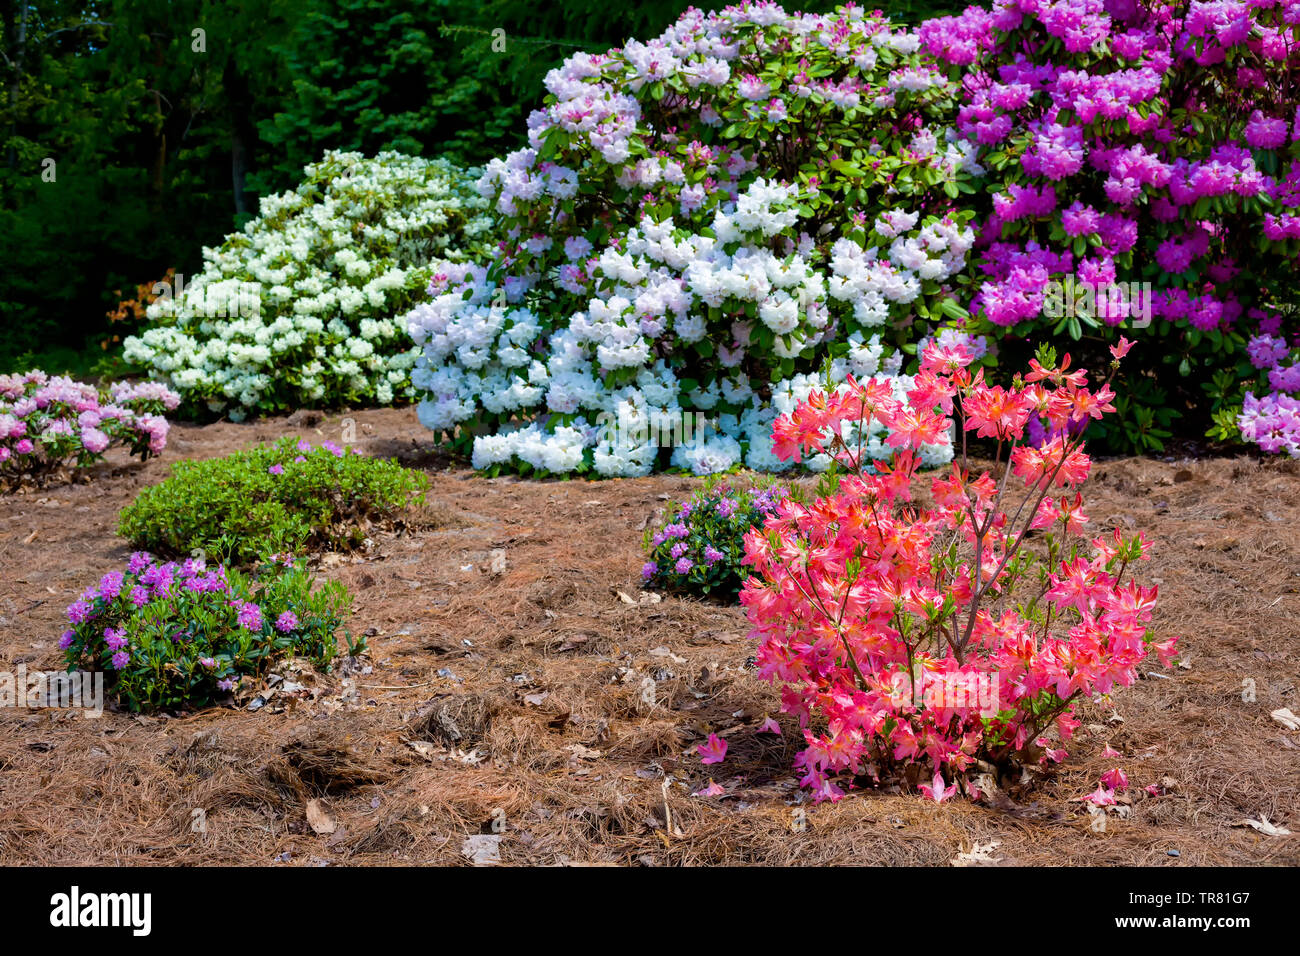 Azaleas and rhododendrons flowering in the spring garden. Stock Photo